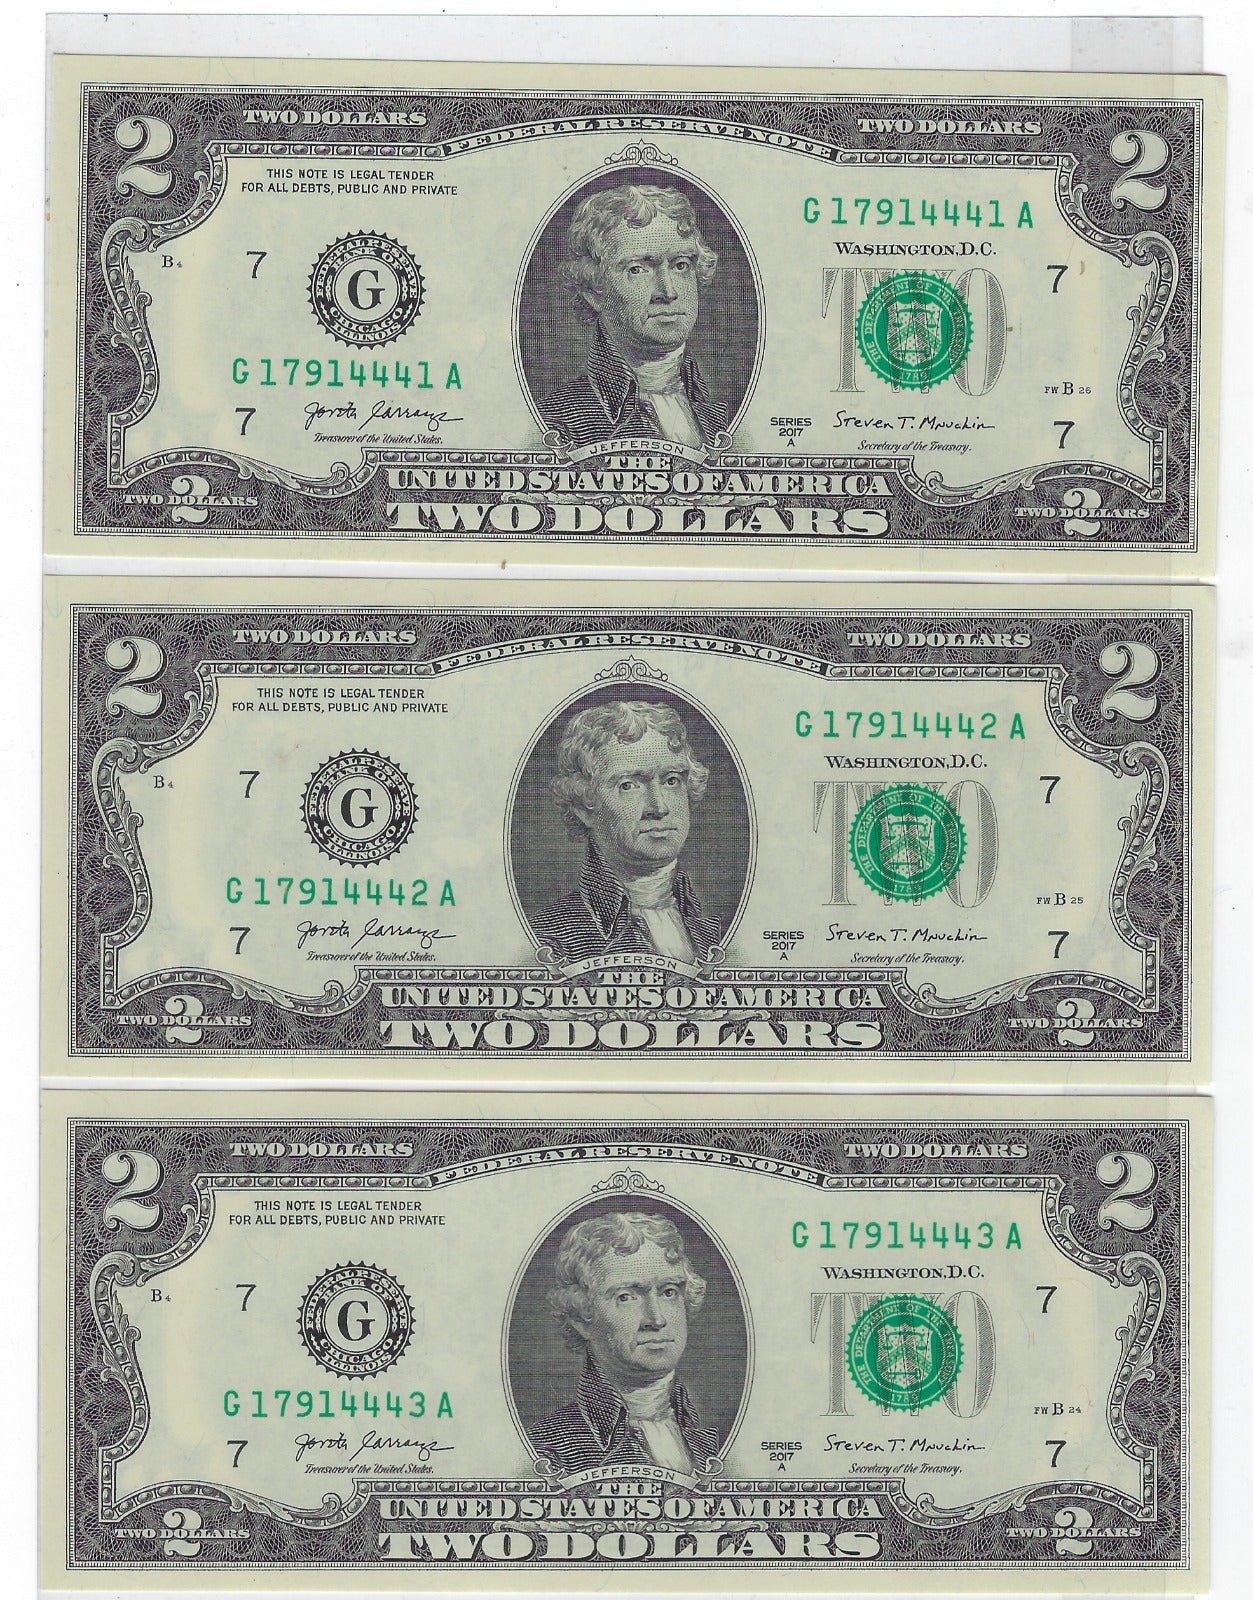 US$2 FRN Chicago 7G x 3 Consecutive SN and all Trio 444 + Lucky SN7 + 1 Bookends 1-----1 UNC.FN41